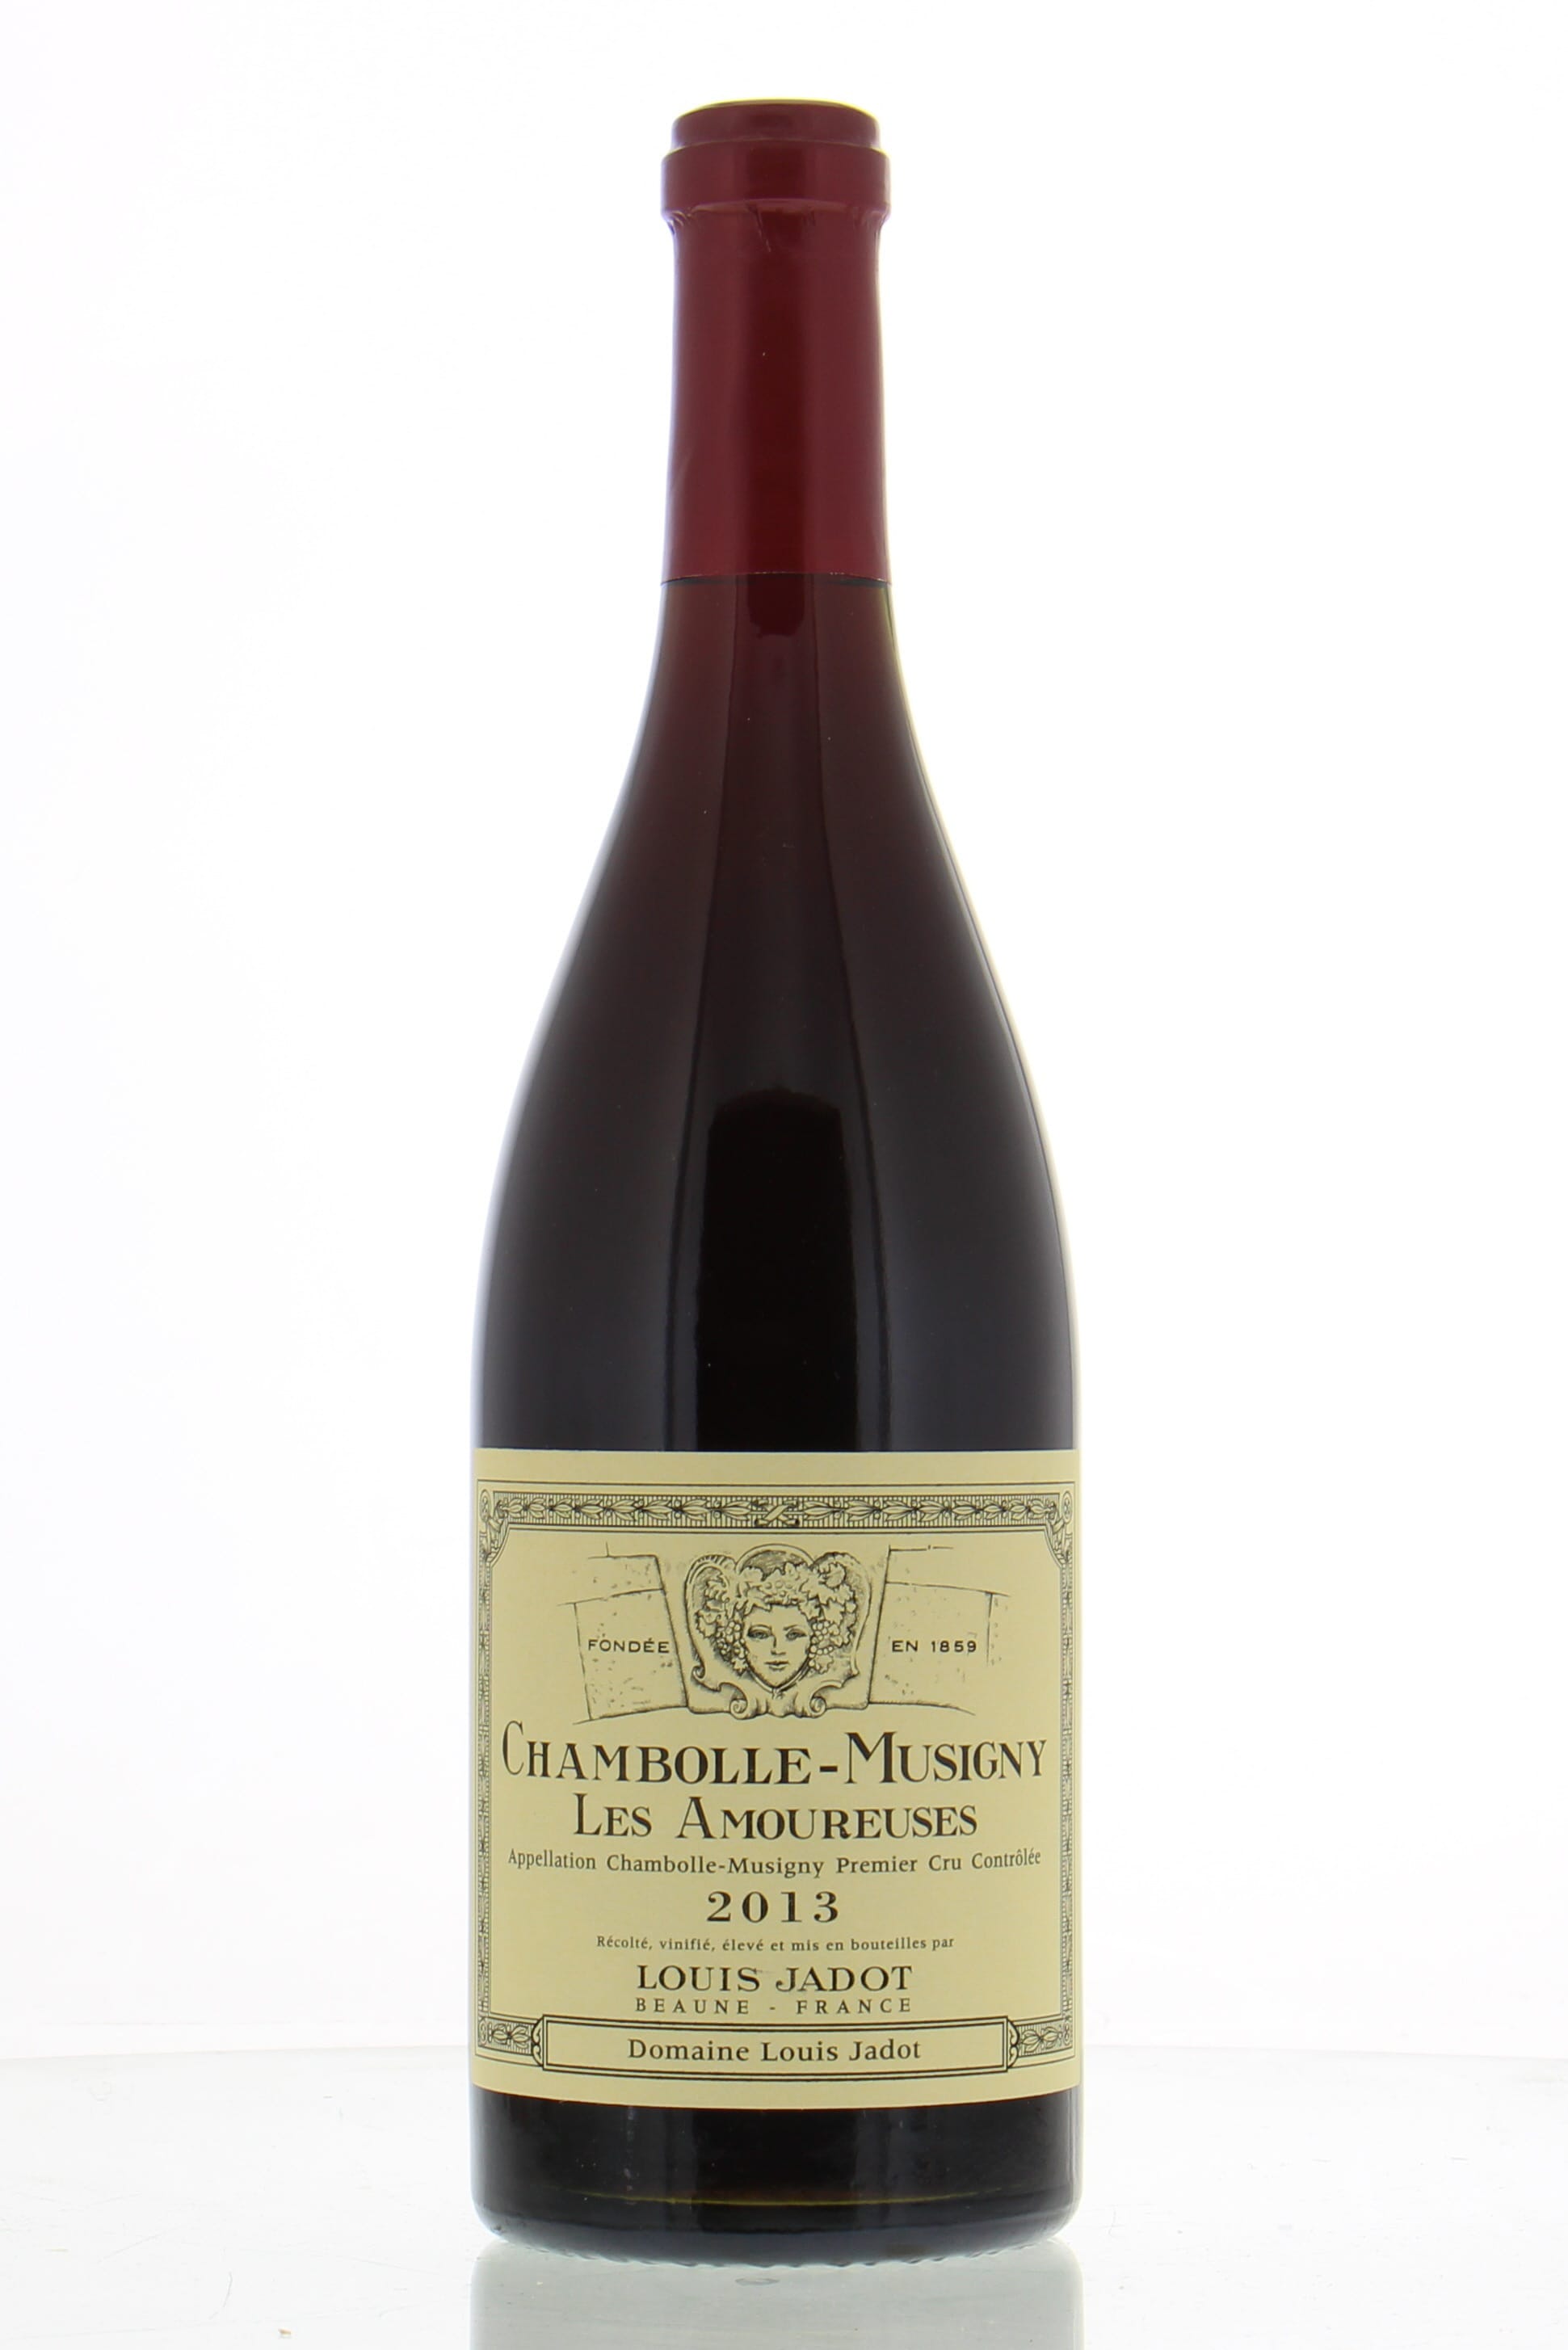 Jadot - Chambolle Musigny les Amoureuses 2013 Perfect